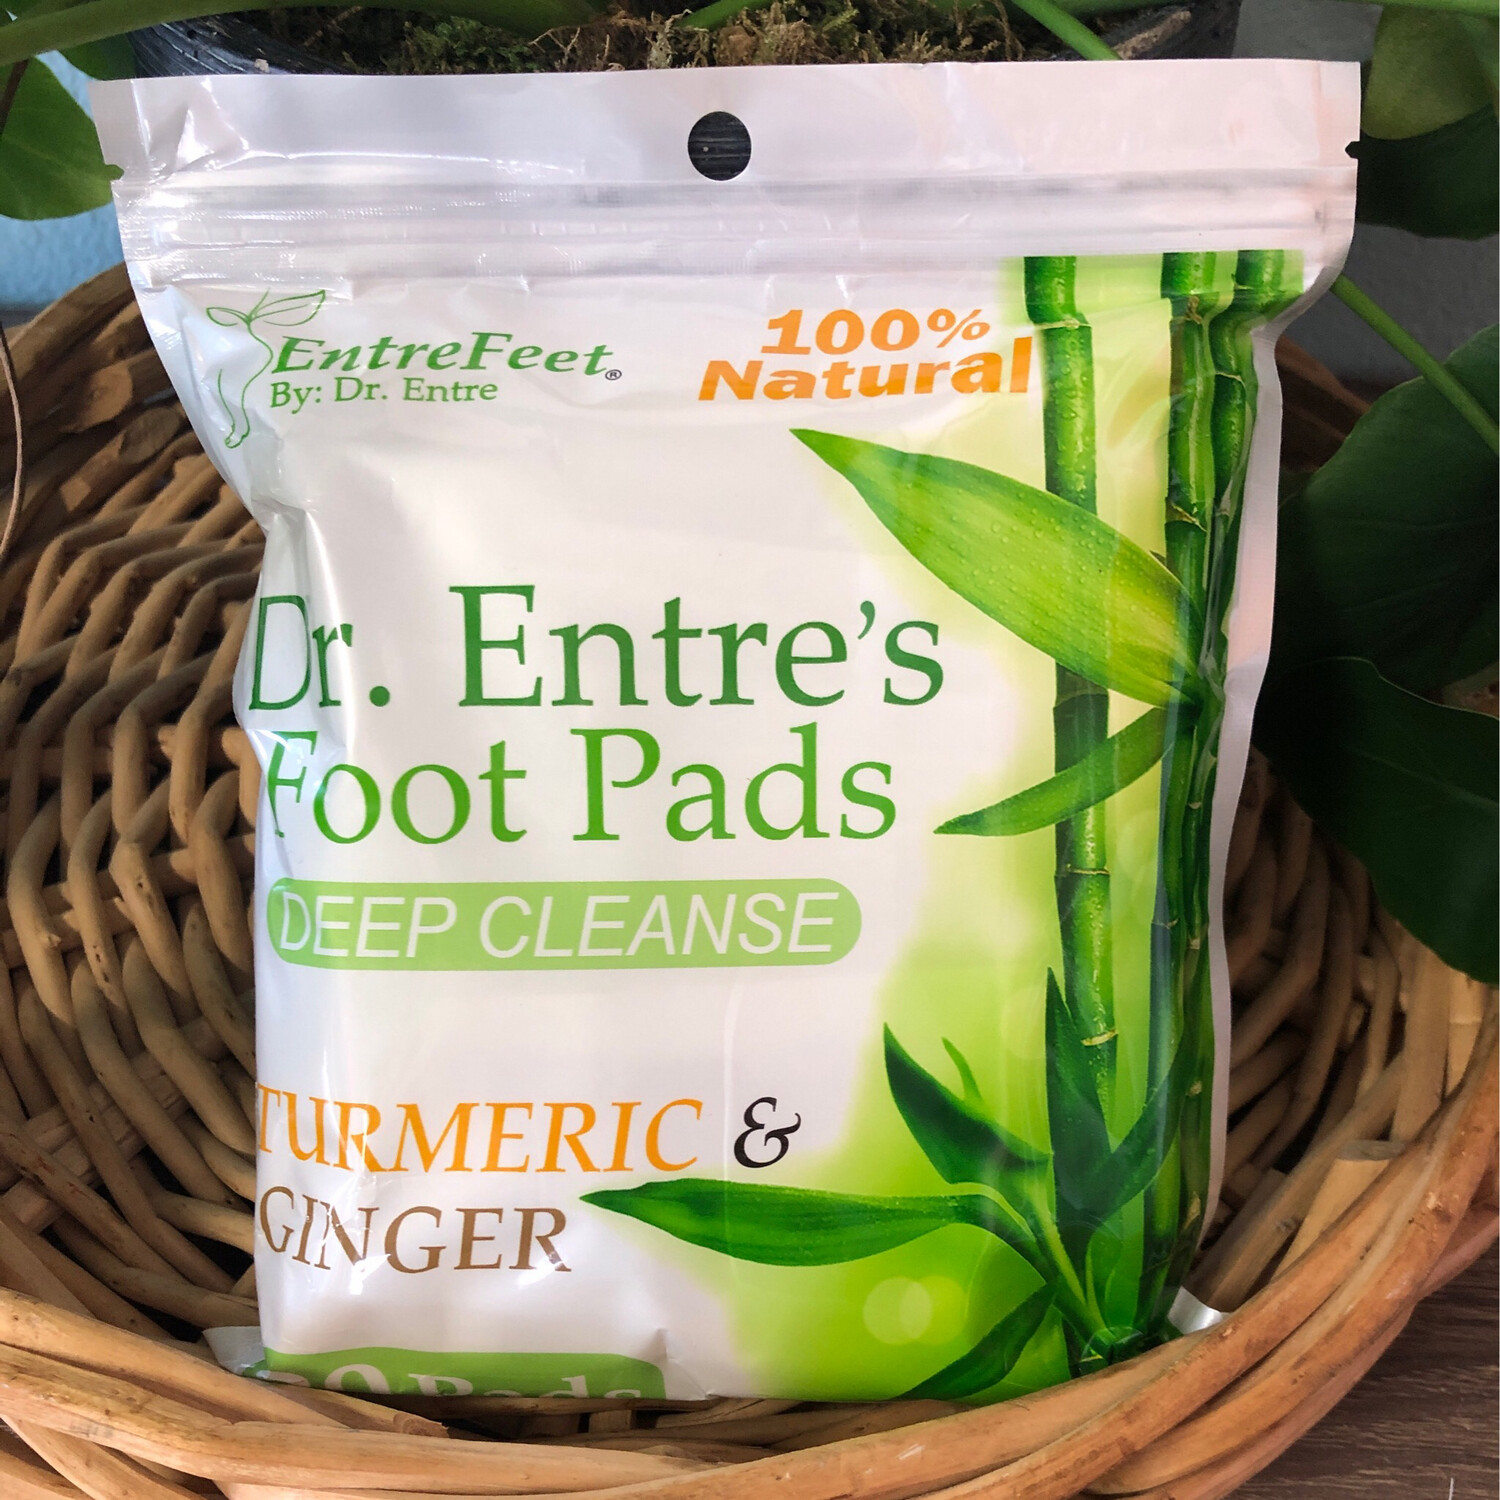 Dr. Entre's Foot Pads Deep Cleanse Turmeric & Ginger